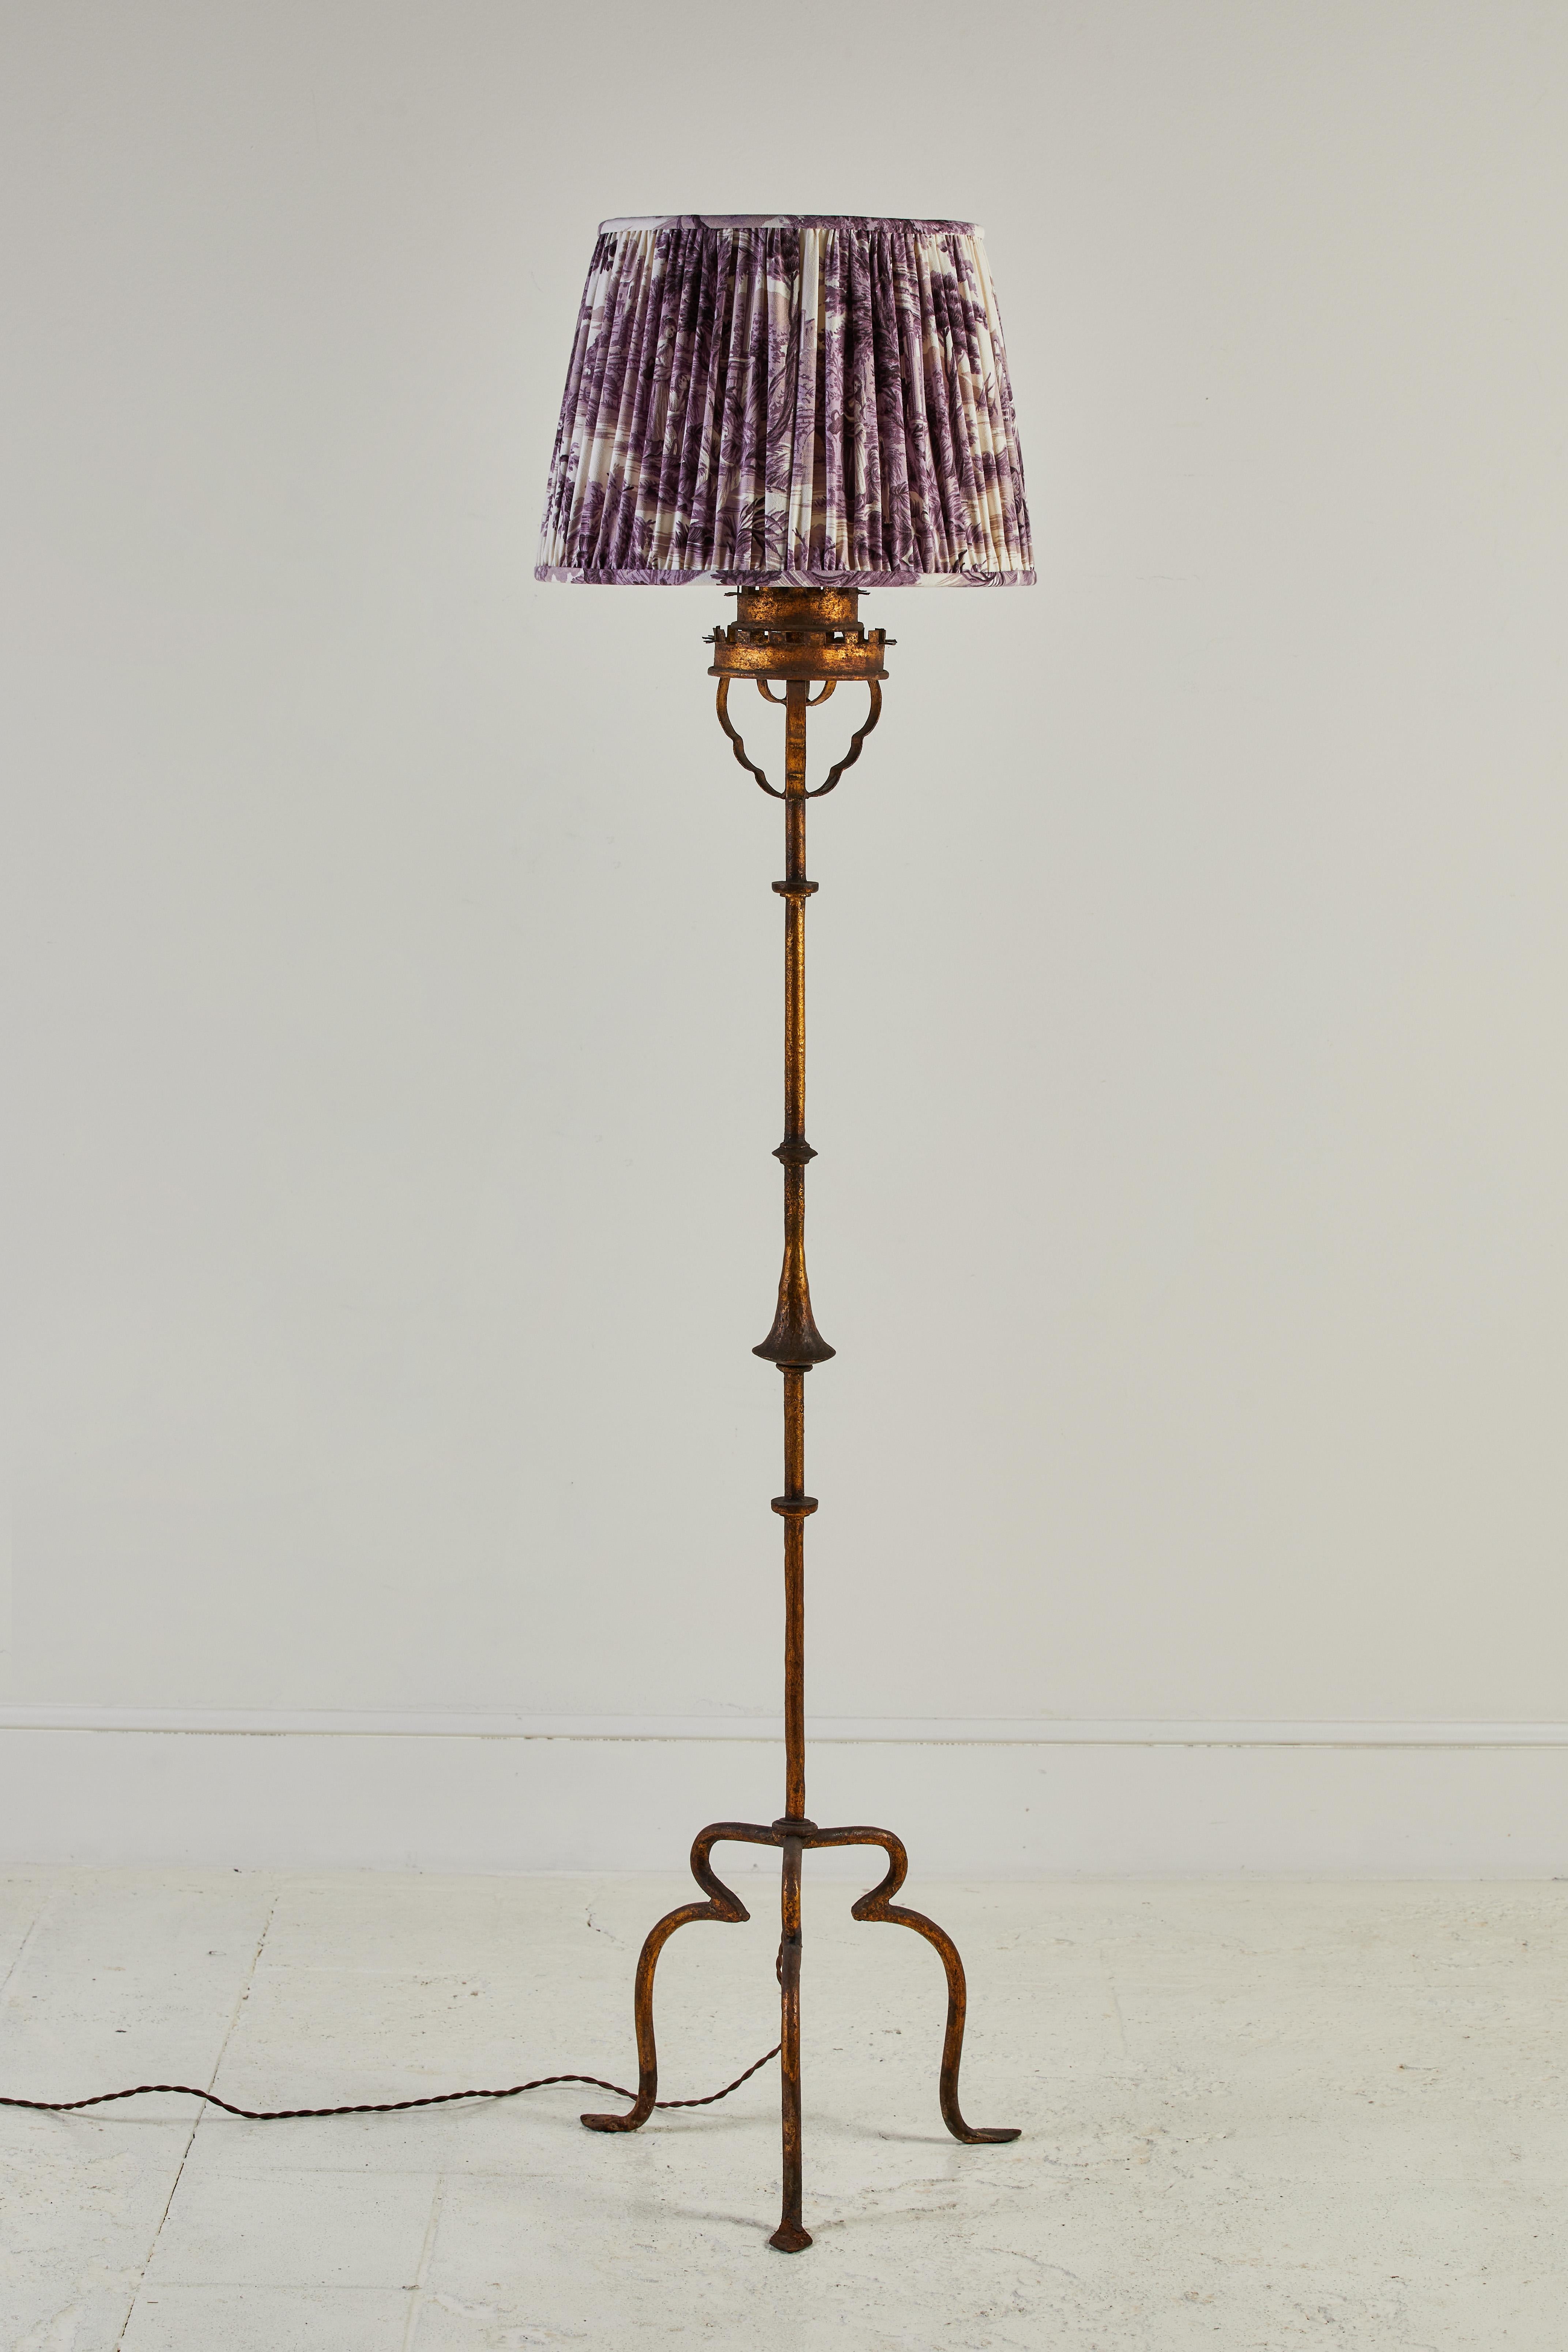 French brass floor lamp with scrolled details. Custom violet shirred toile lampshade included. There are two floor lamps available, they are similar but slightly different. One lamp is slightly taller.

The shorter lamp measures: 65